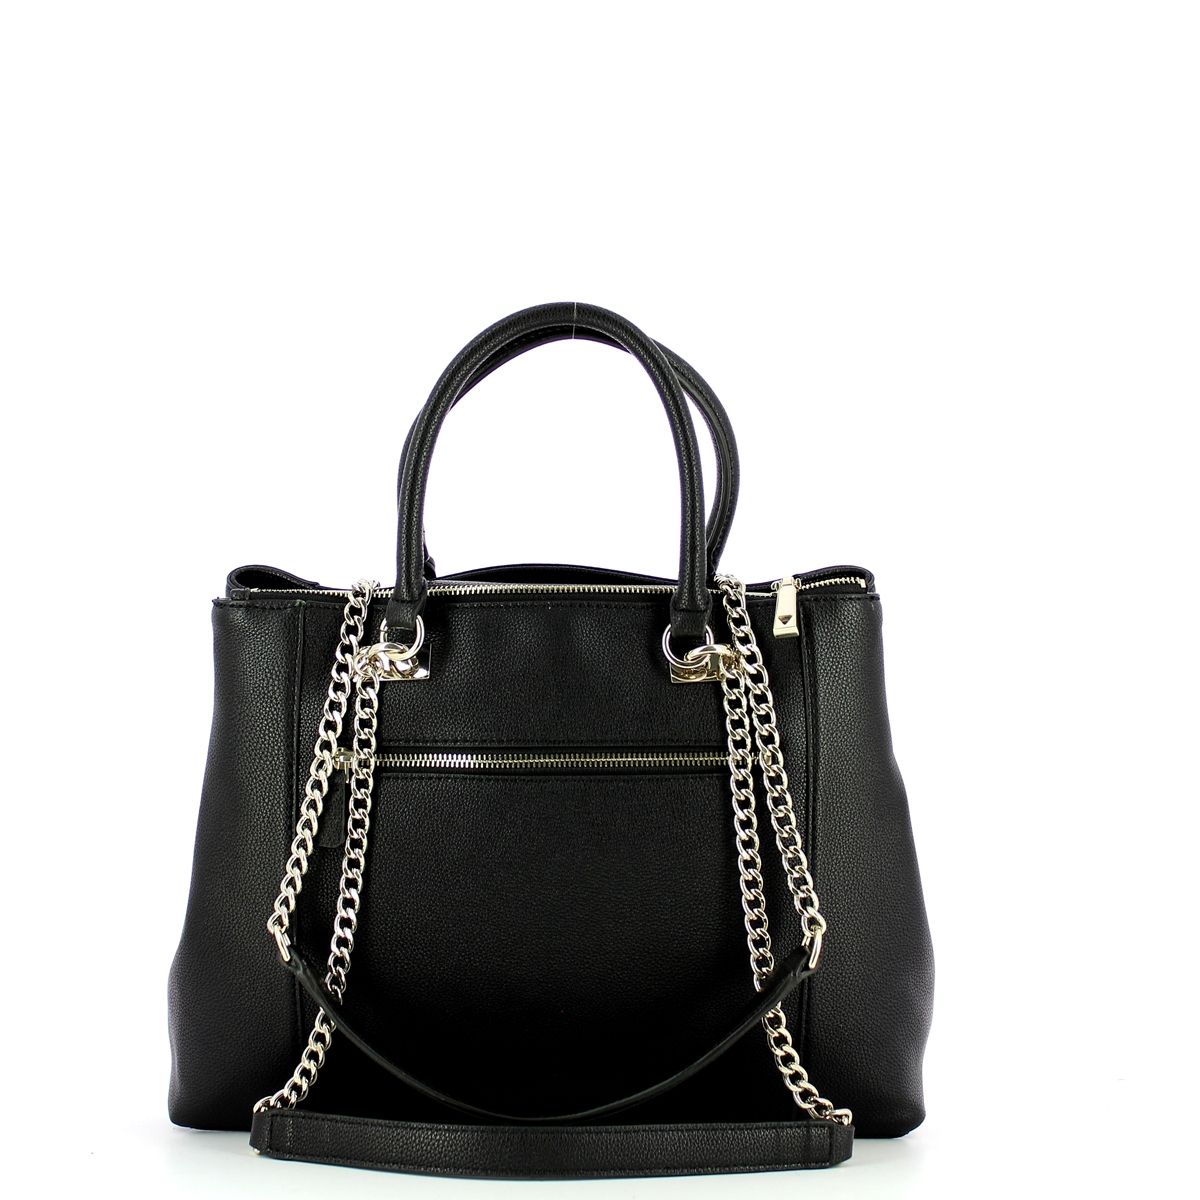 Holly Society Luxe Carryall Guess, faux leather handbag with multiple compartments, and two sets of handles.